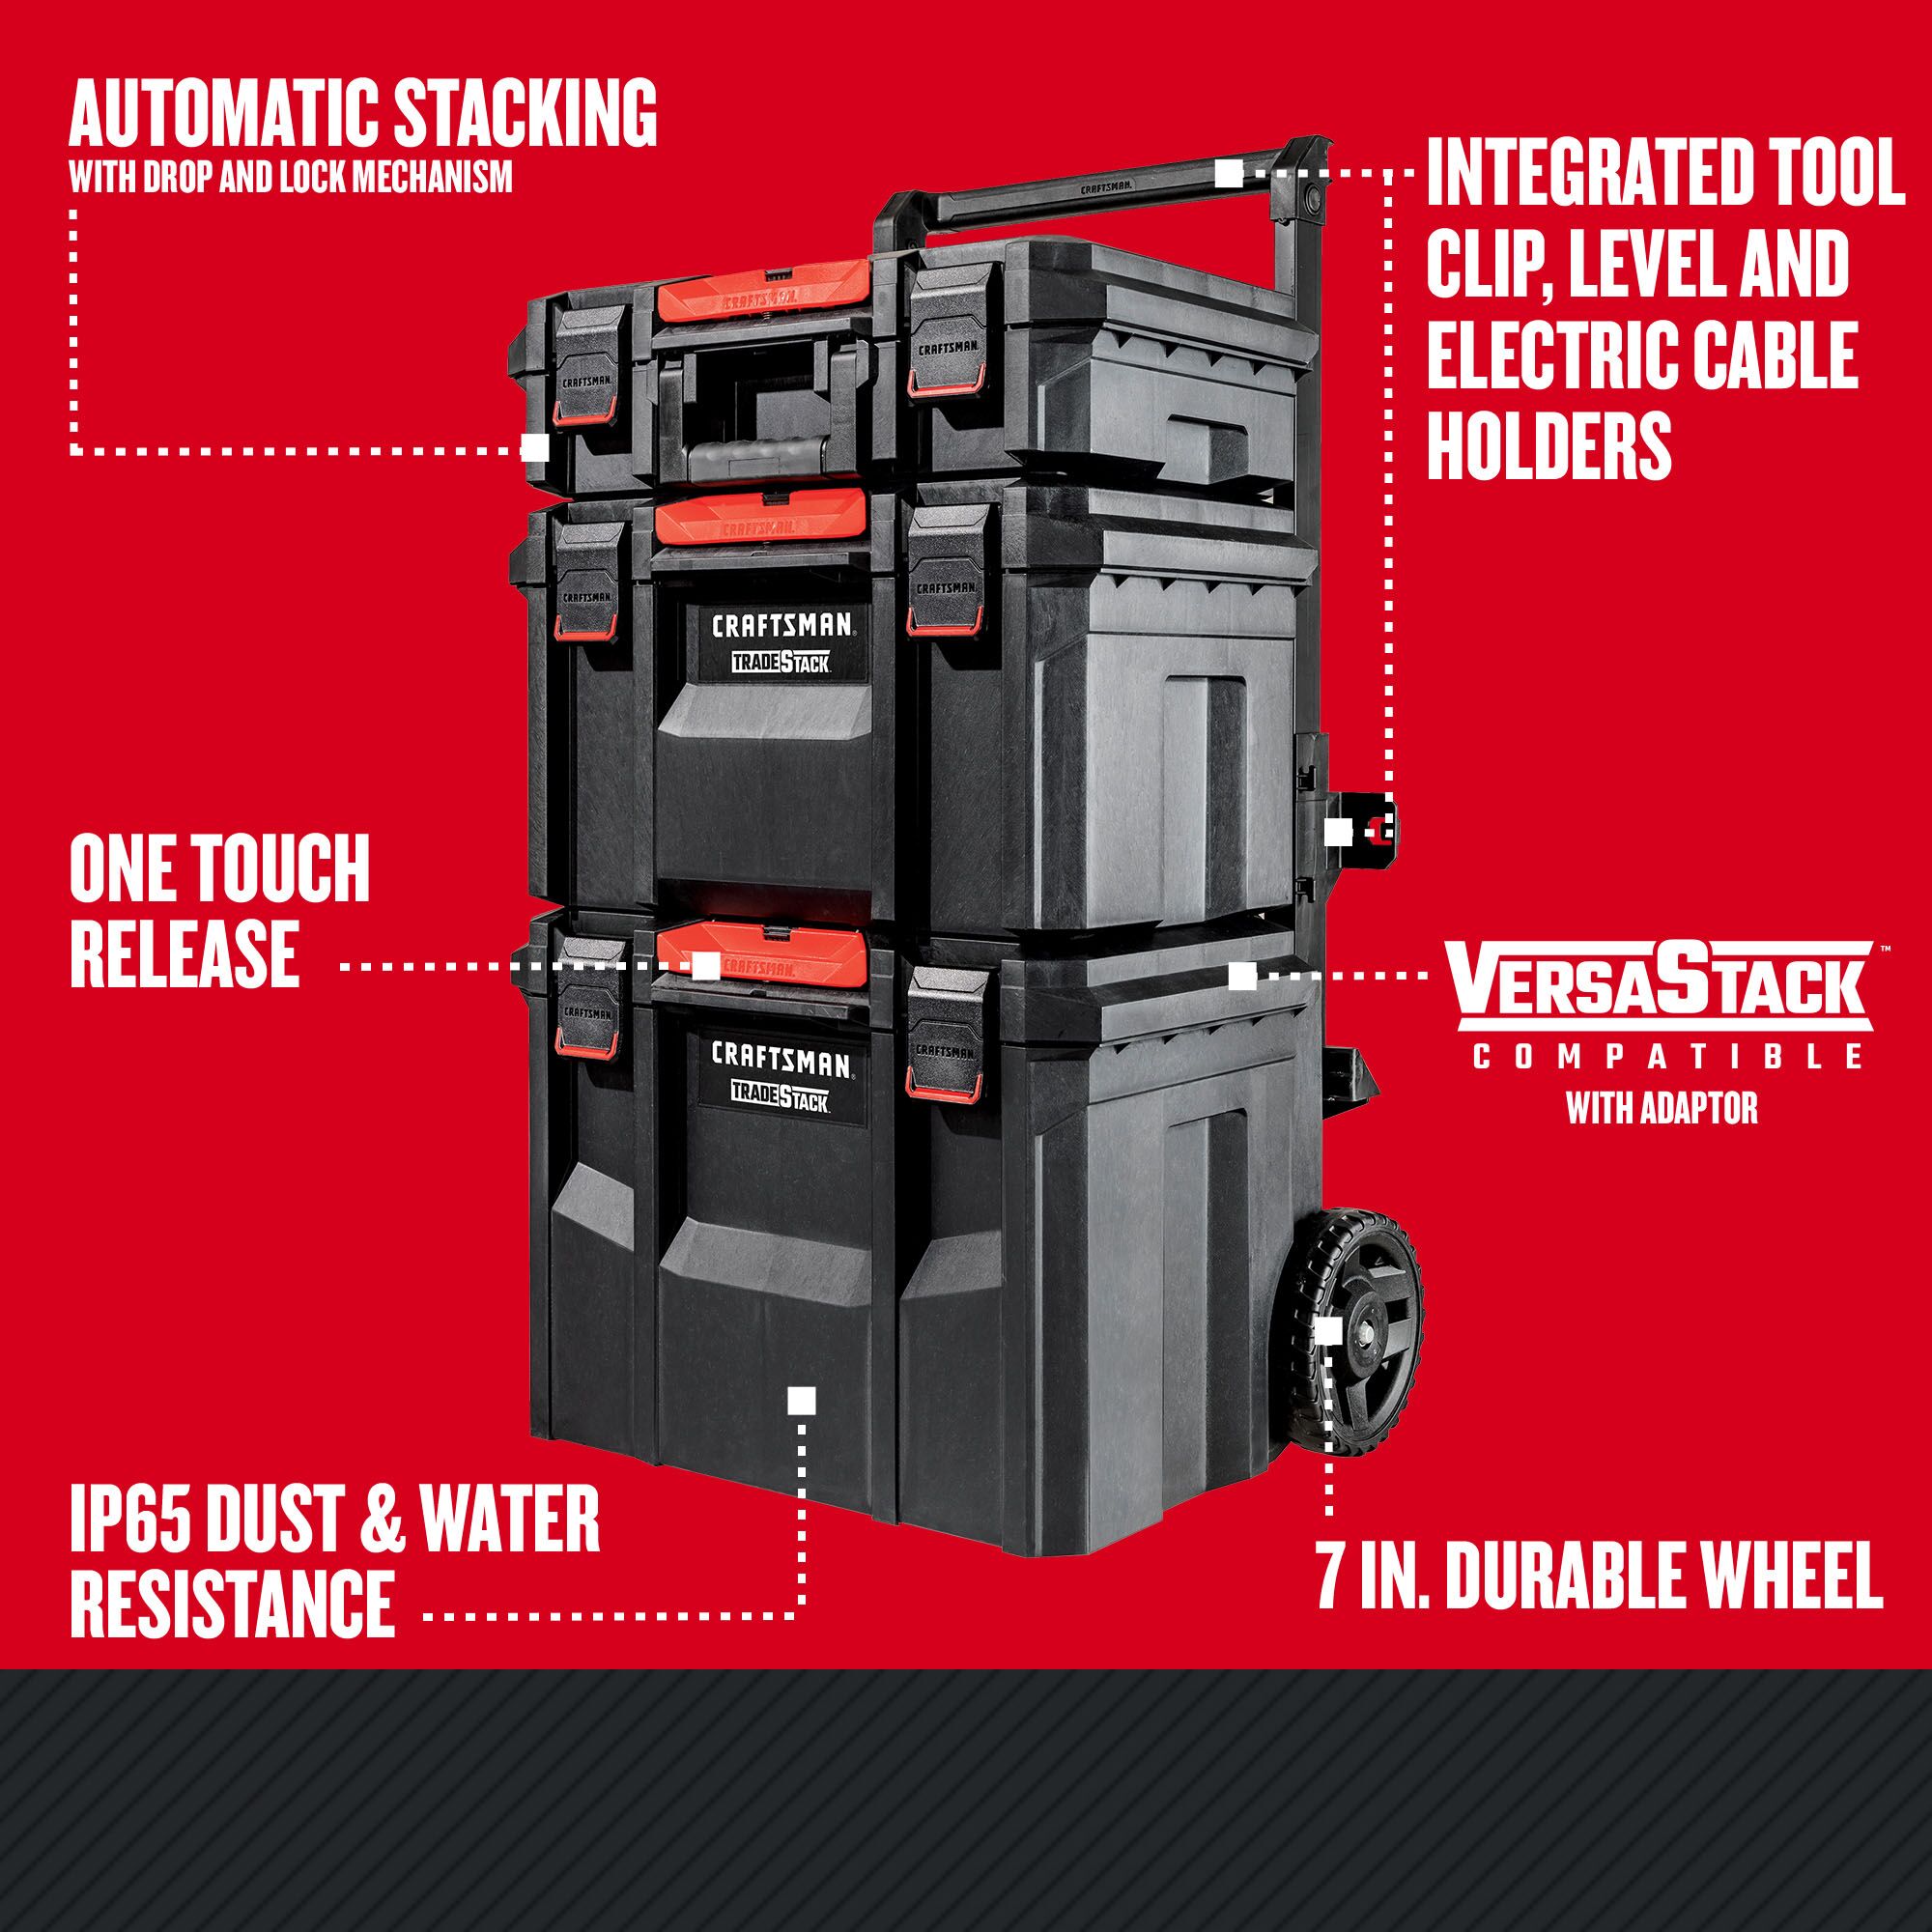 Graphic of CRAFTSMAN Storage: Tradesystem highlighting product features